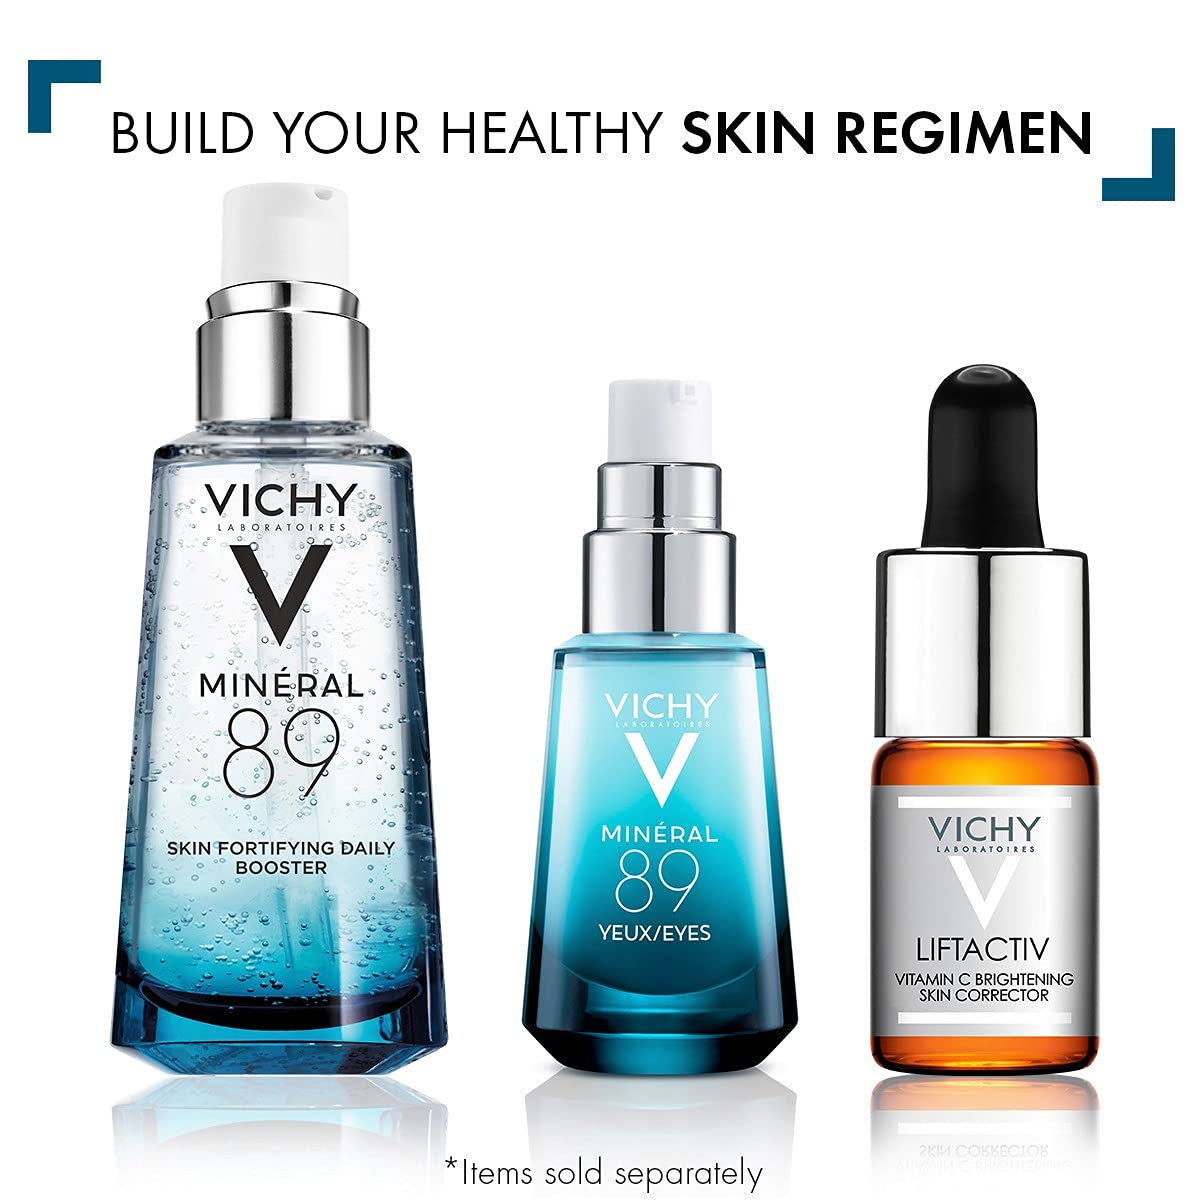 Vichy Mineral 89 Hyaluronic Acid Face Serum - Moisturizing and Hydrating Serum for Sensitive and Dry Skin